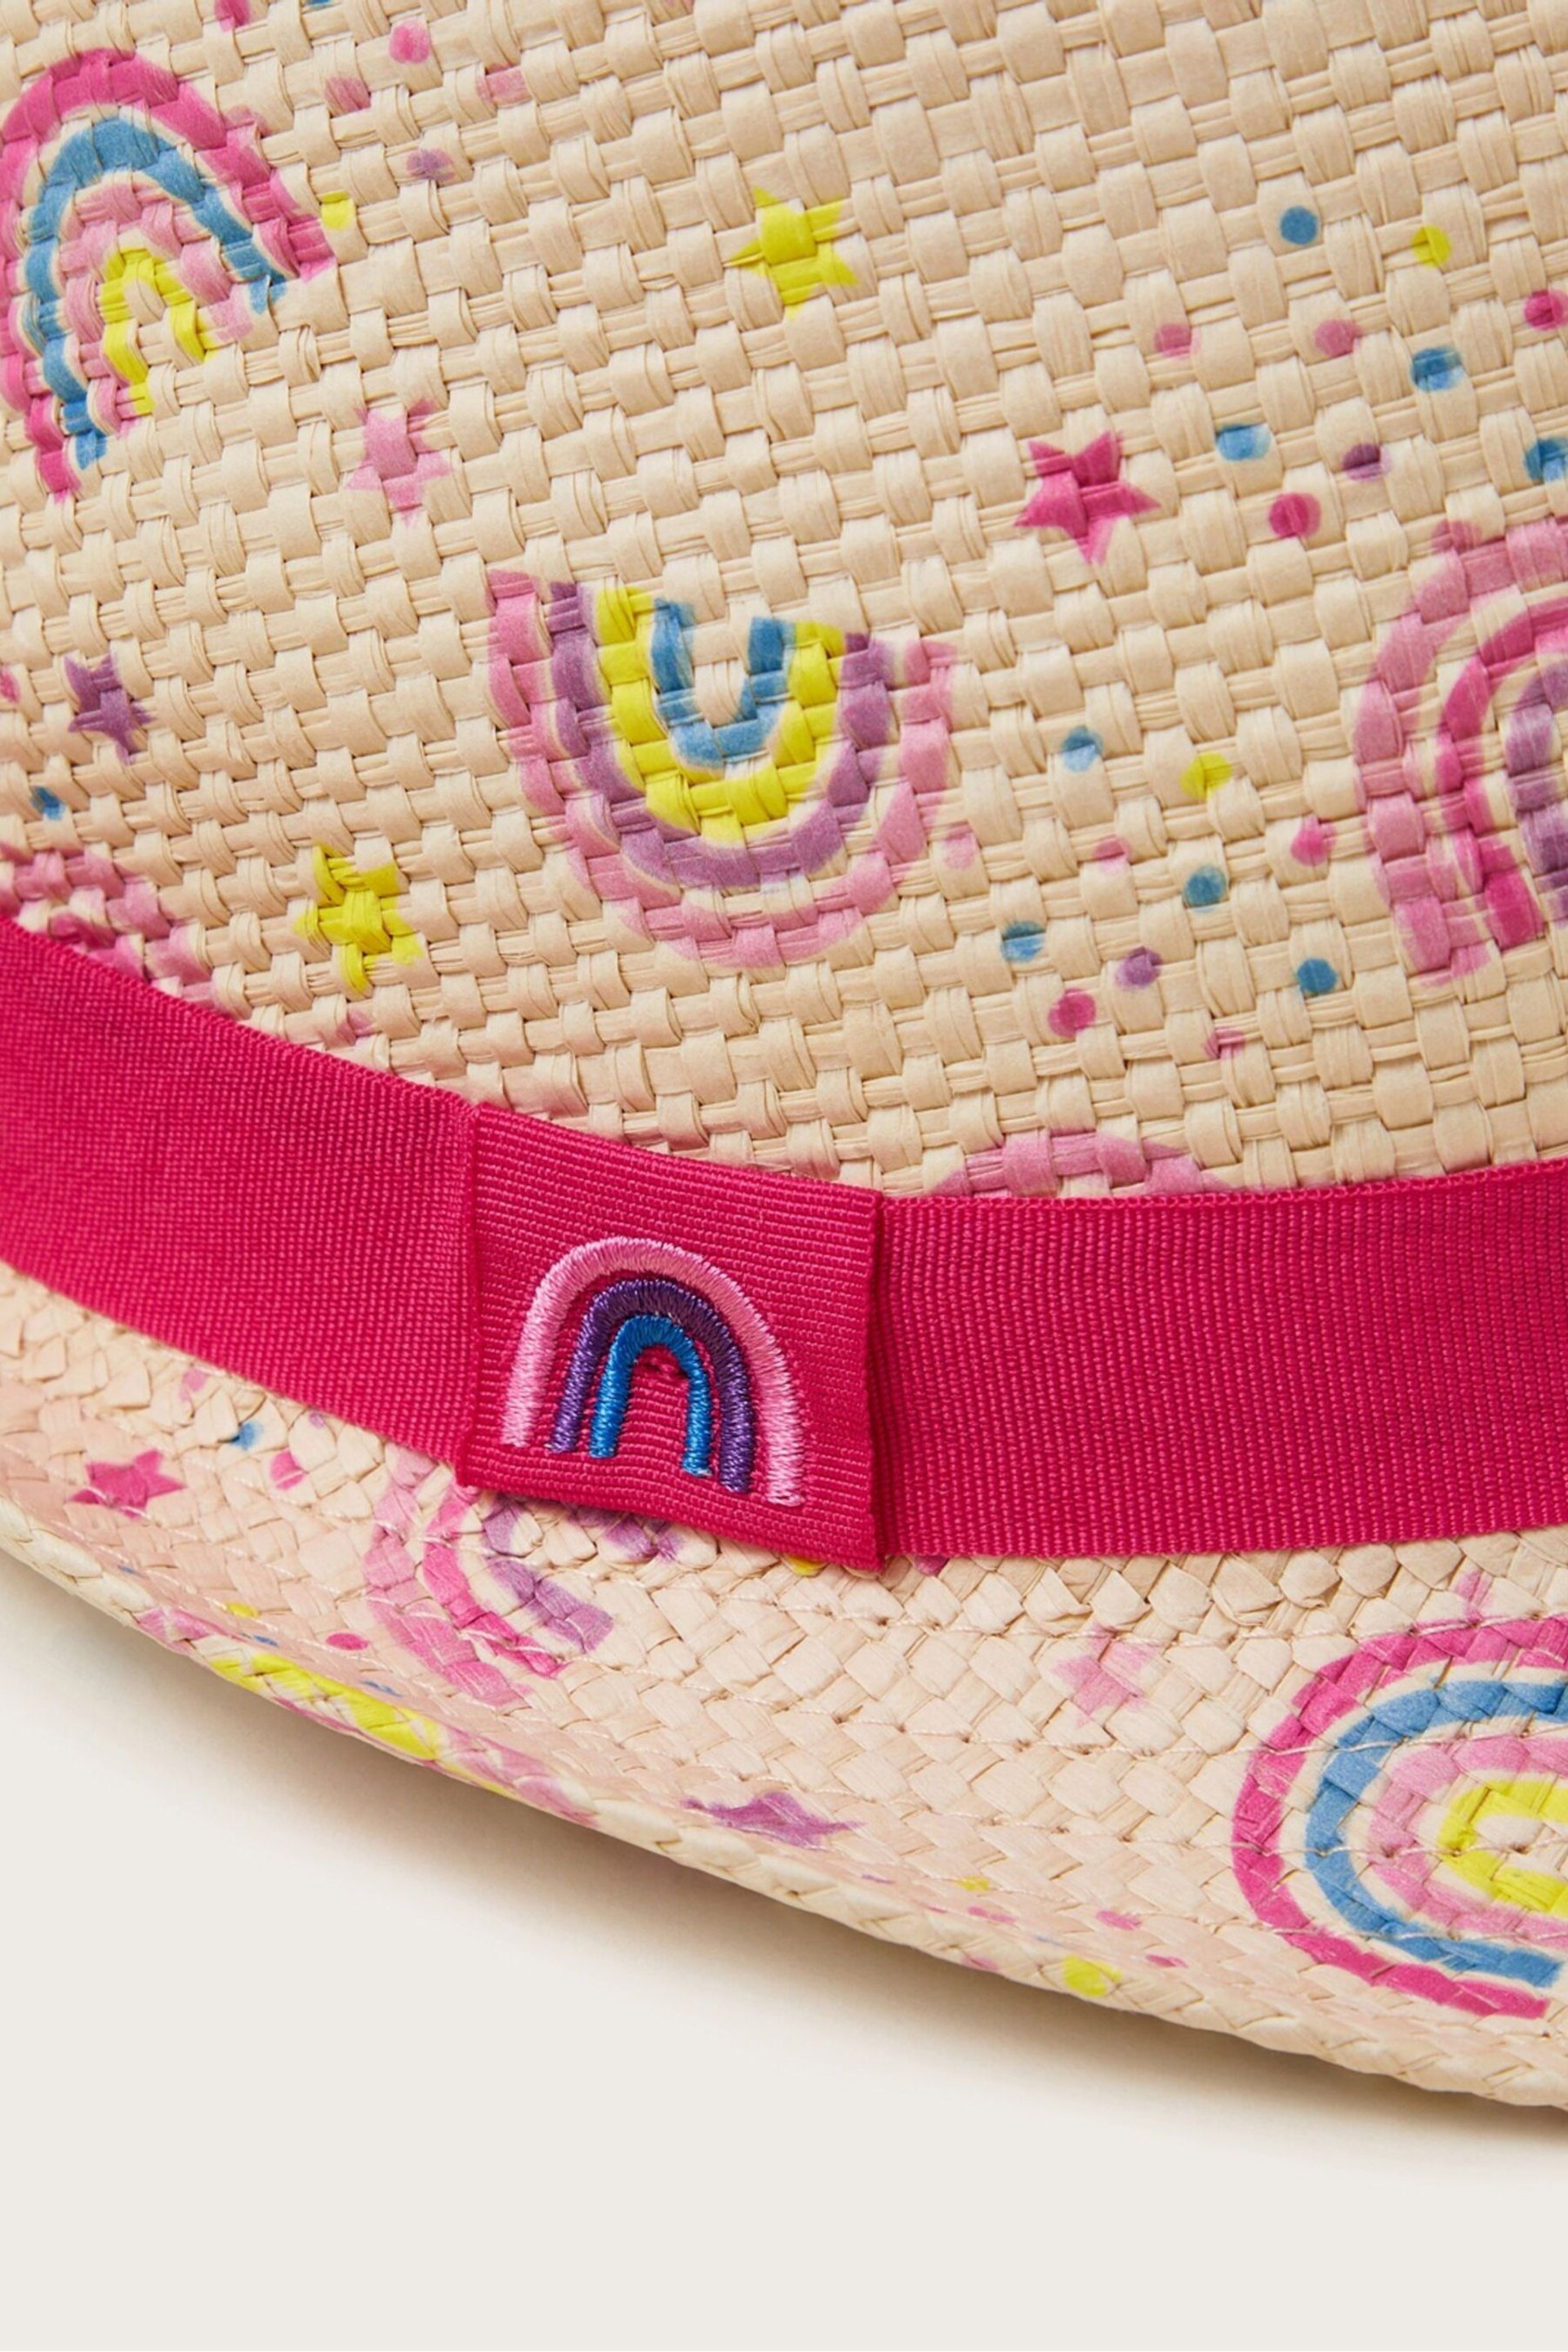 Monsoon Pink Rainbow Trilby Hat - Image 2 of 2